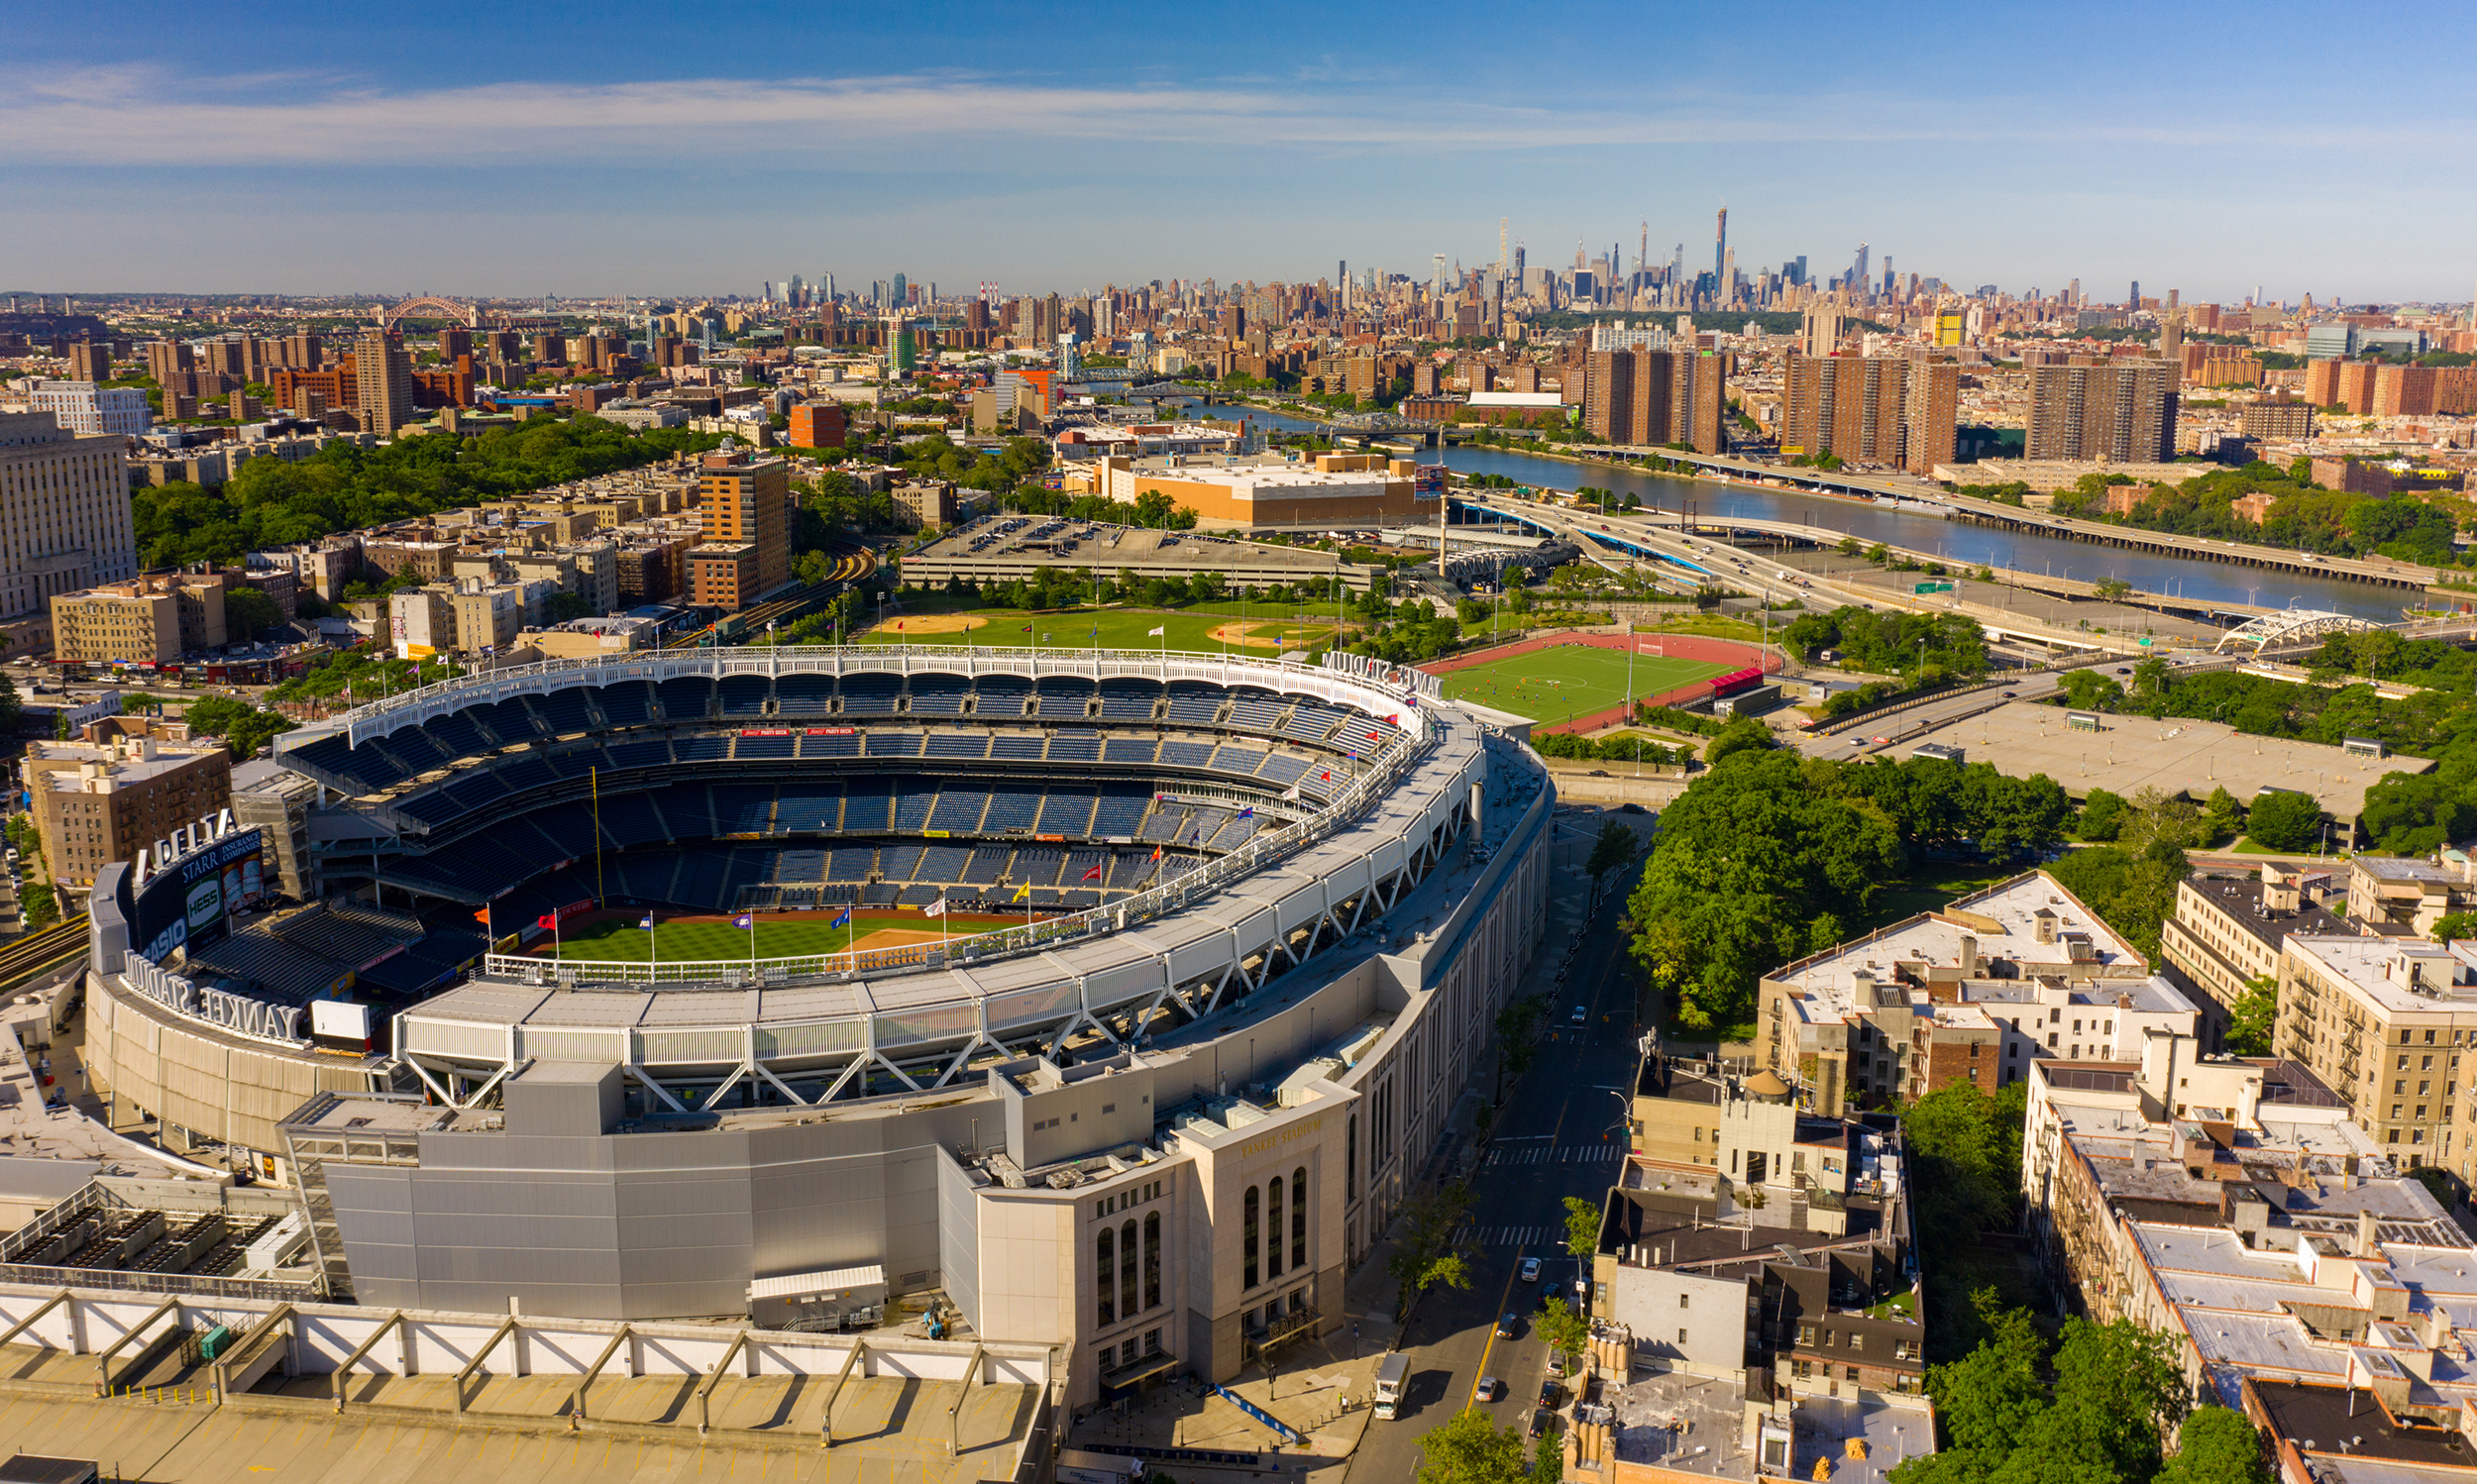 Though Yankee Stadium is an unmistakable landmark, the Bronx is just as well known for its rich, diverse melting pot of cultures.